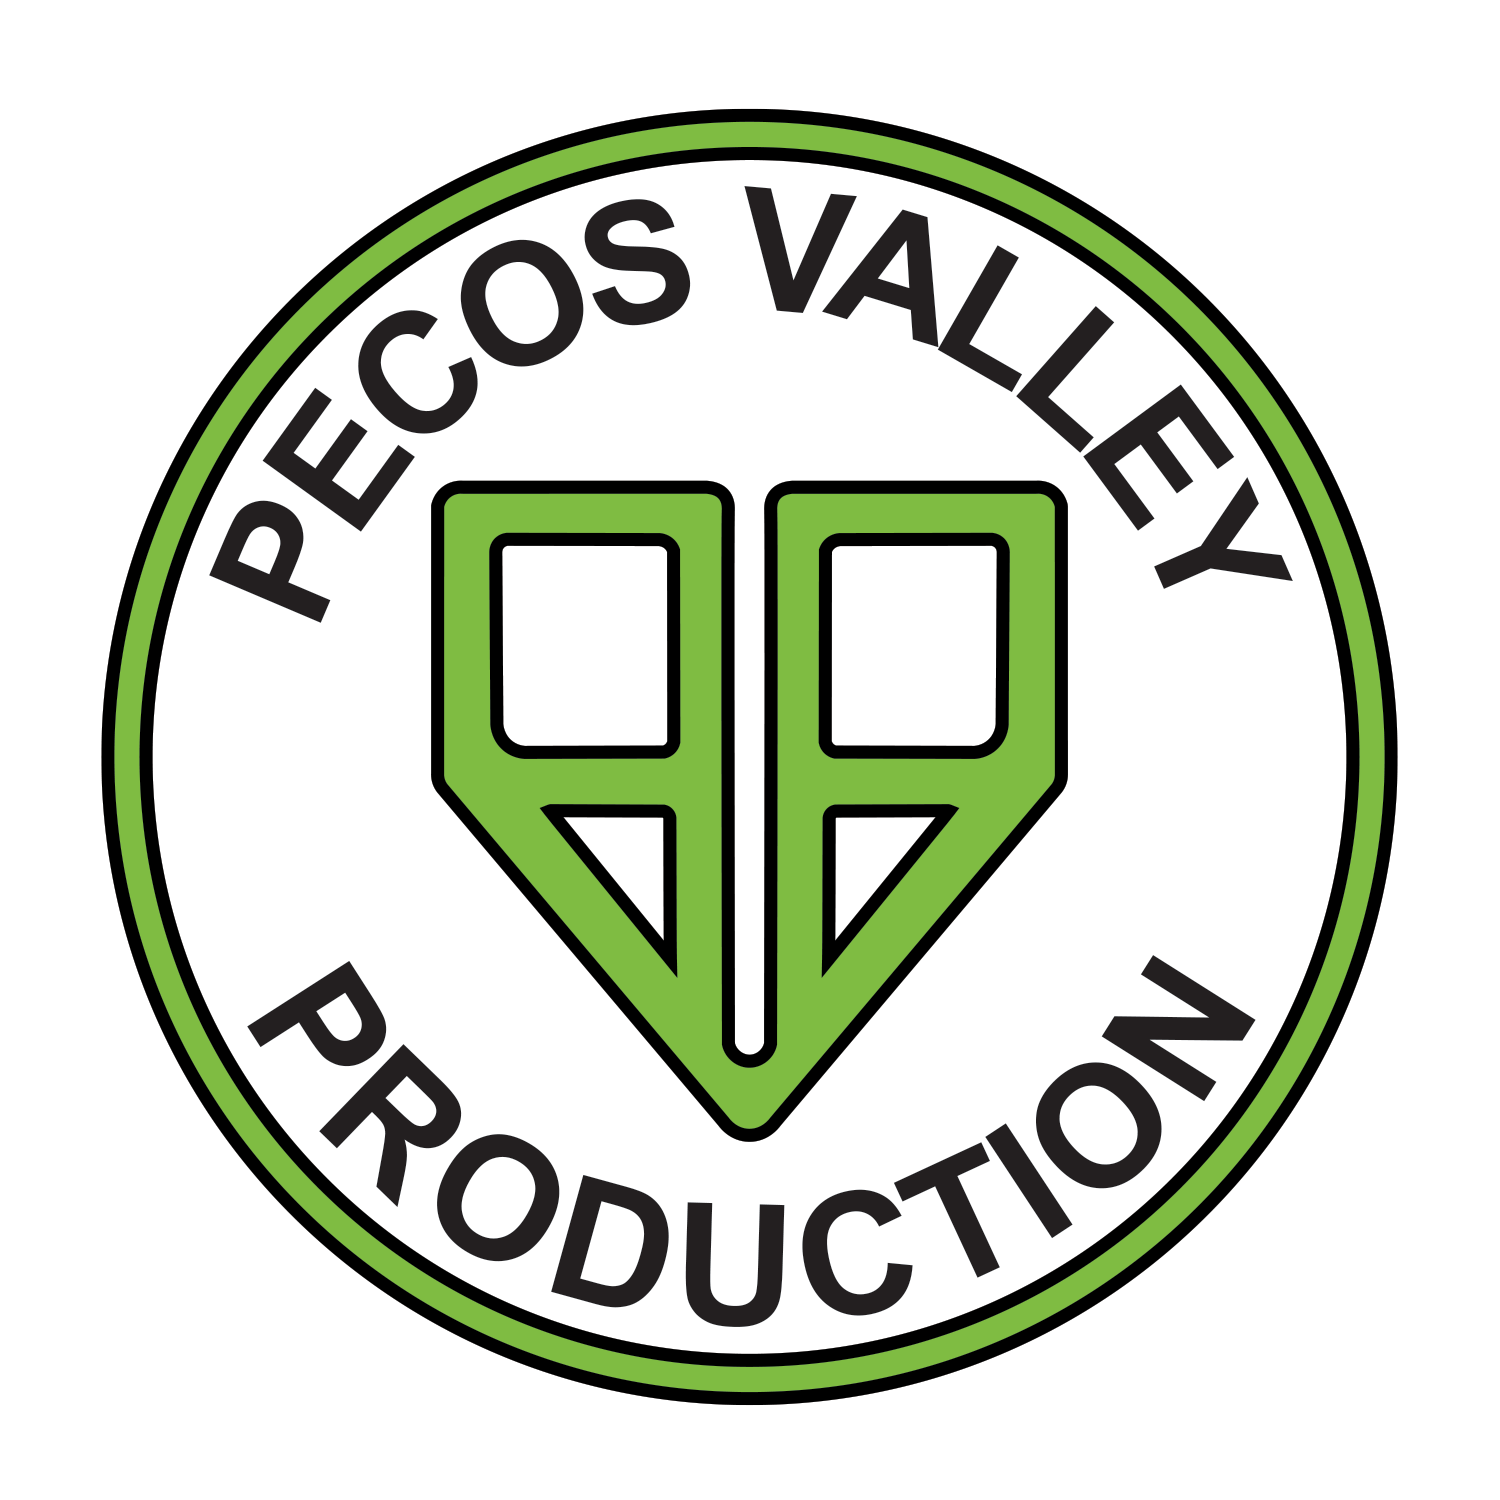 Pecos Valley Production - Roswell